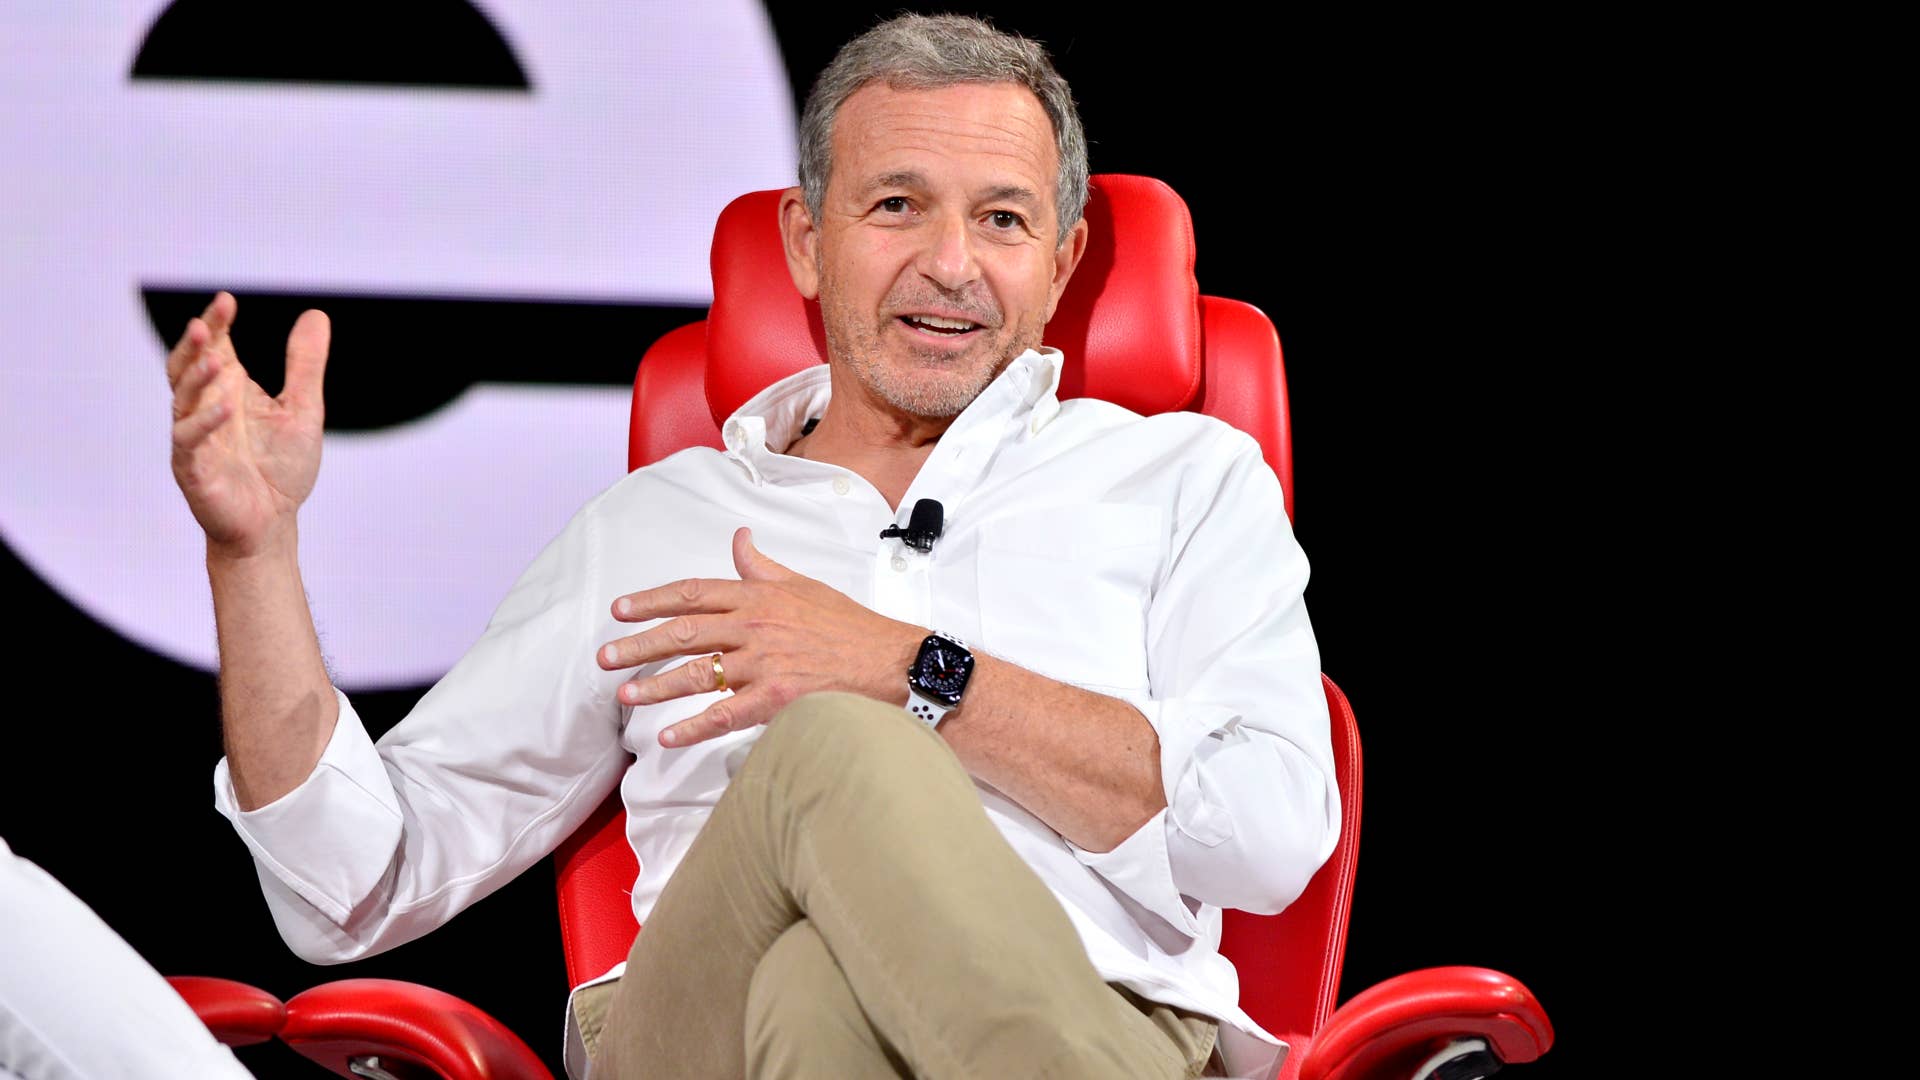 Bob Iger is pictured giving a talk